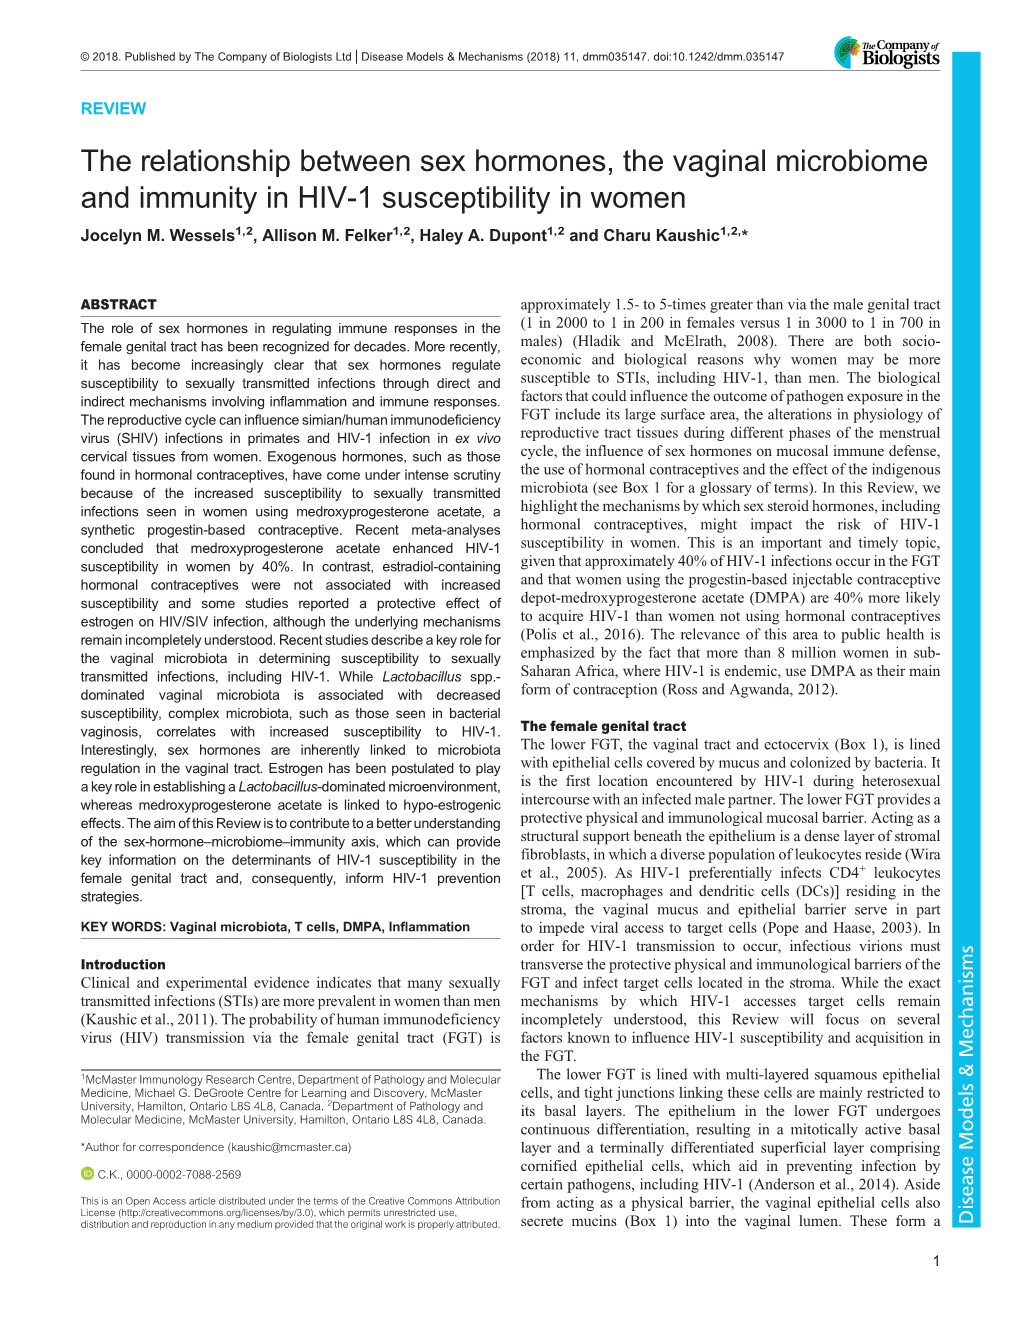 The Relationship Between Sex Hormones, the Vaginal Microbiome and Immunity in HIV-1 Susceptibility in Women Jocelyn M